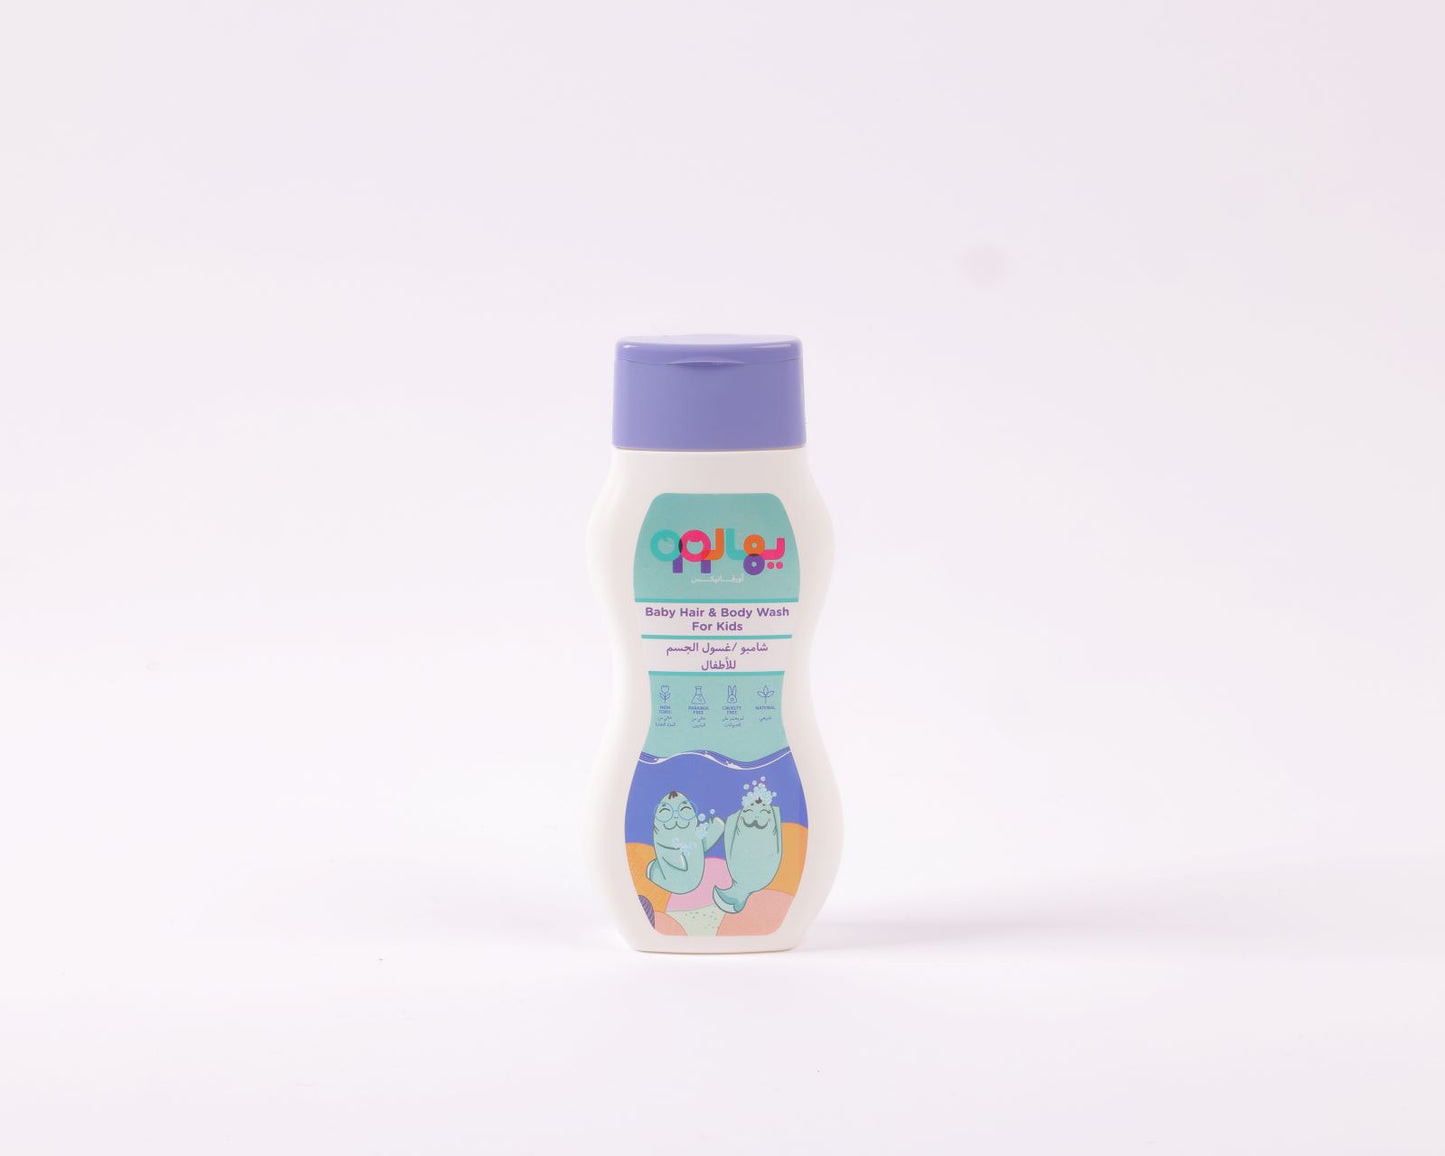 Baby Hair and Body Wash for Kids